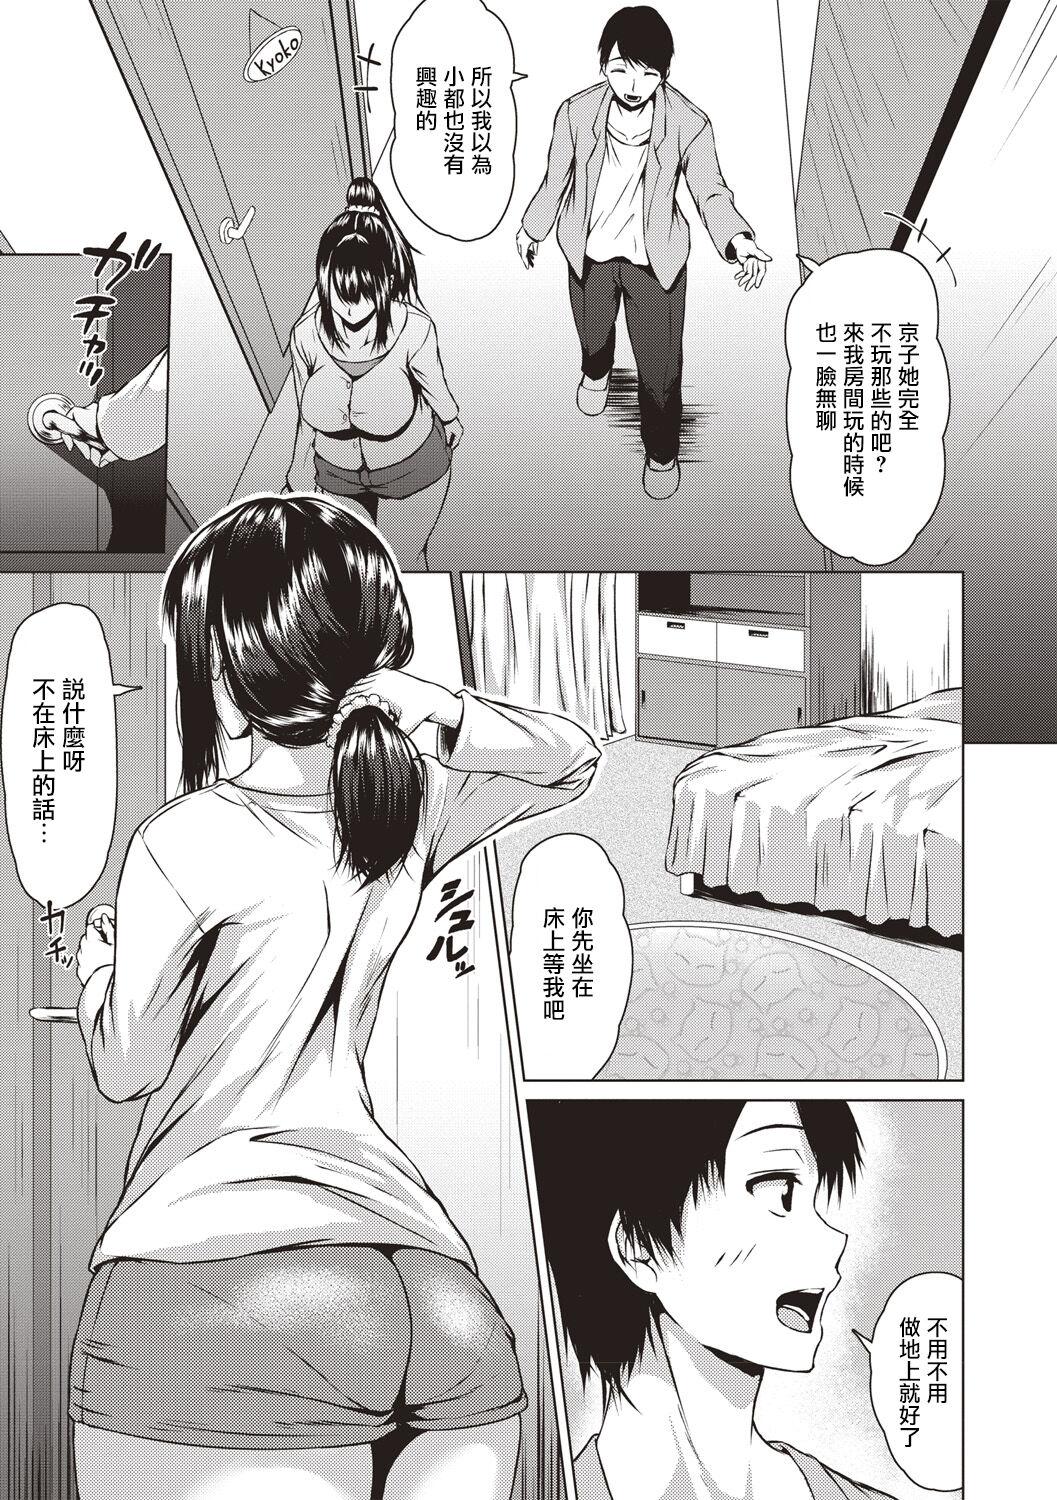 Behind Tsumamigui | 偷吃 Toy - Page 7